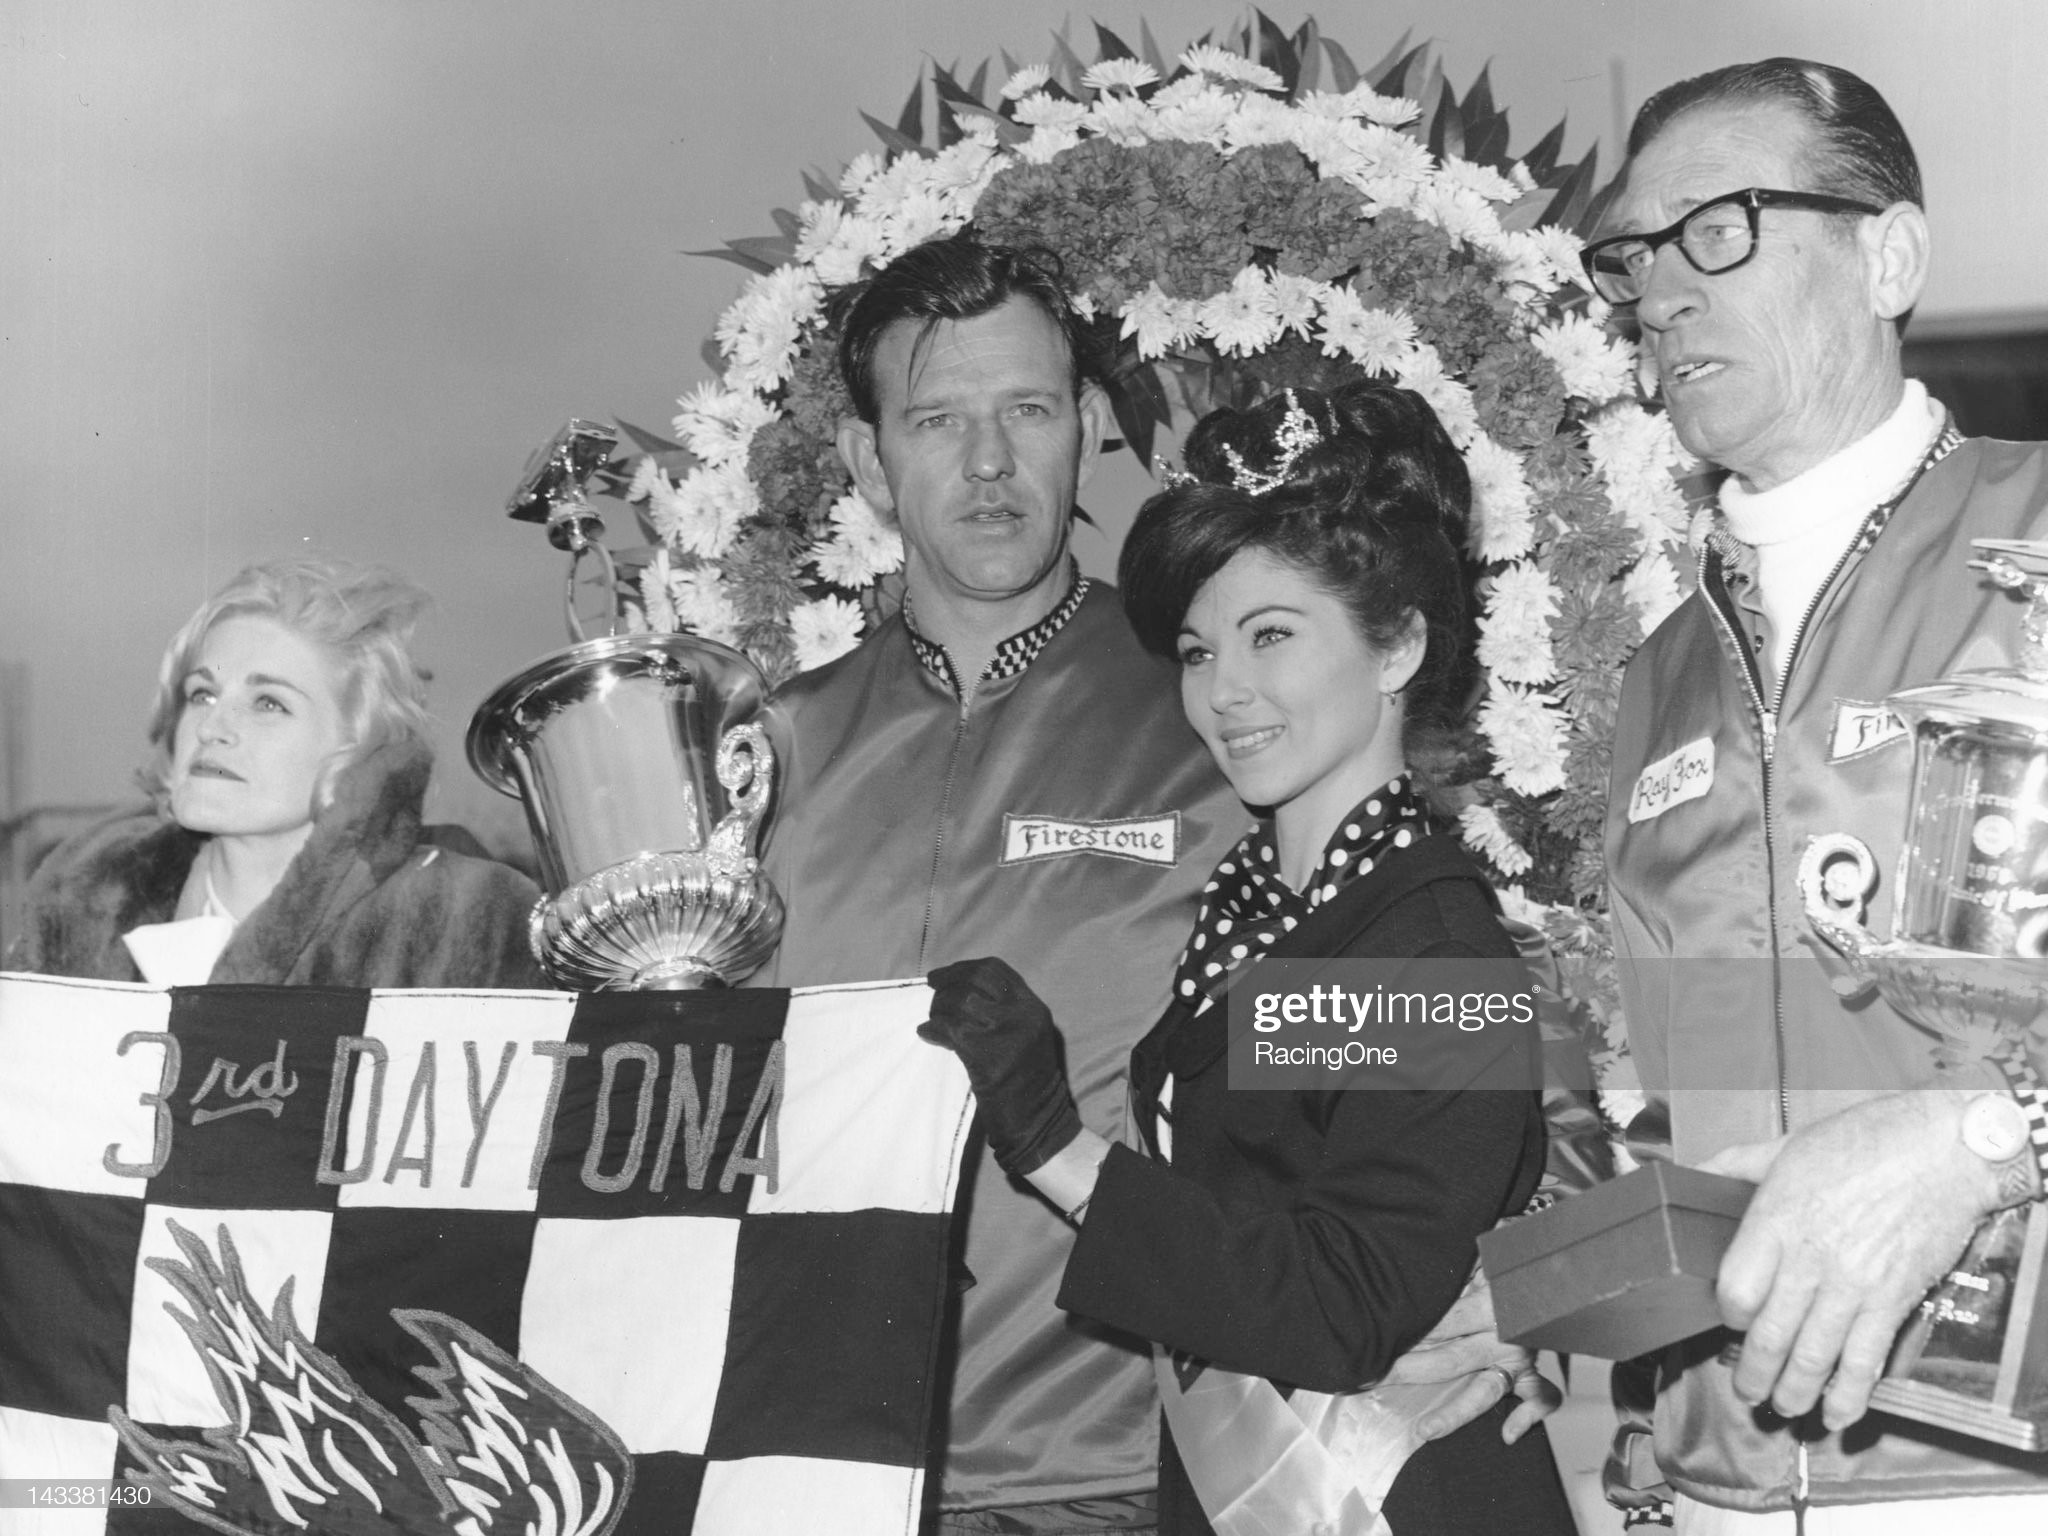 Daytona Beach, Florida, February 24, 1968: Bunkie Blackburn is surrounded by race queens in victory lane after winning the Permatex 300 NASCAR Late Model Sportsman race at Daytona International Speedway. Blackburn’s car owner, Ray Fox, is on the right.